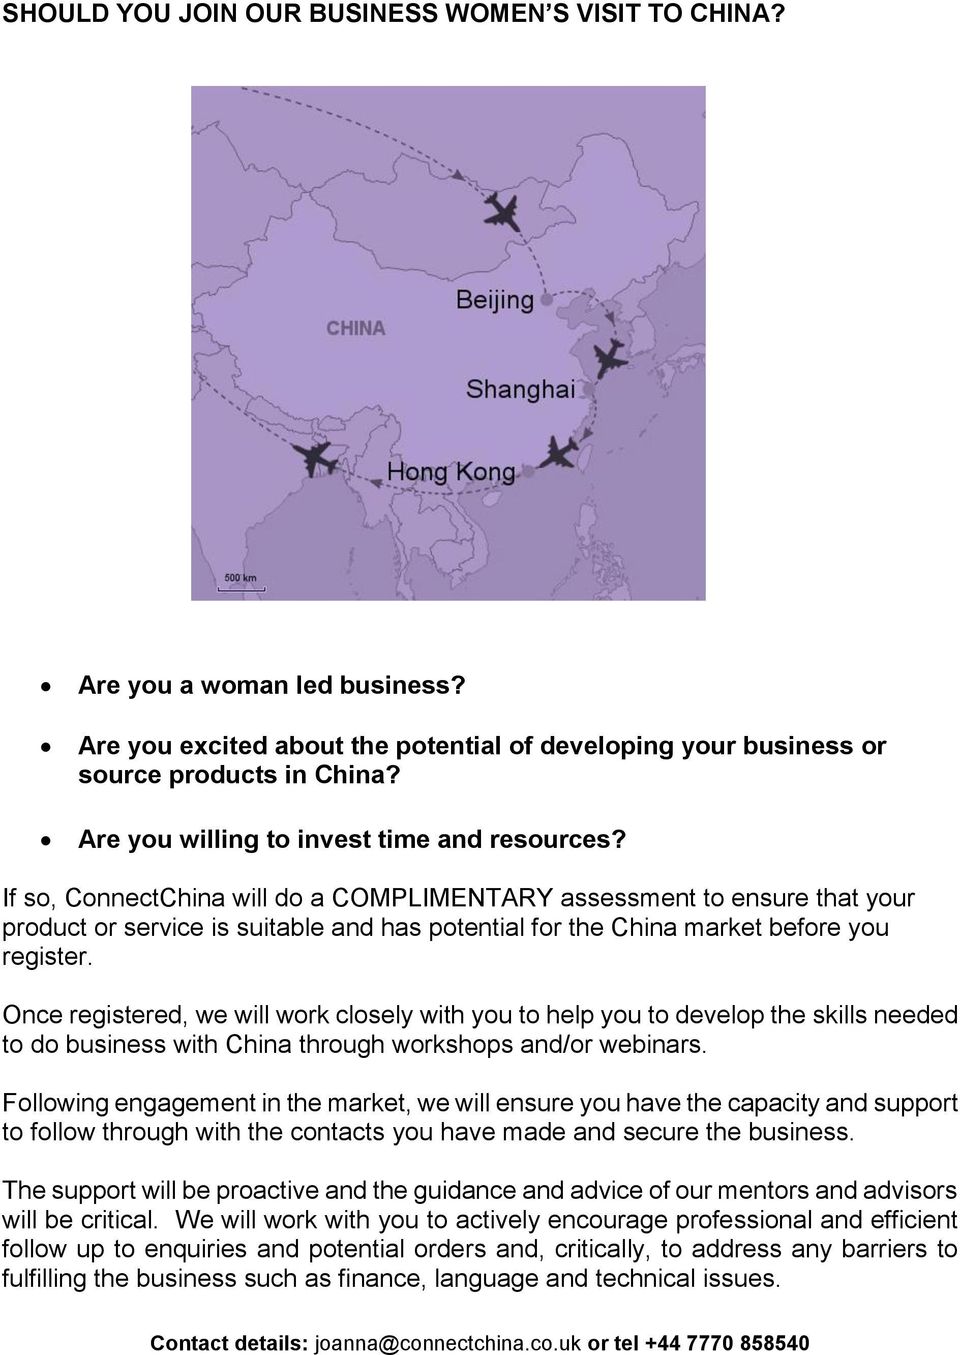 If so, ConnectChina will do a COMPLIMENTARY assessment to ensure that your product or service is suitable and has potential for the China market before you register.